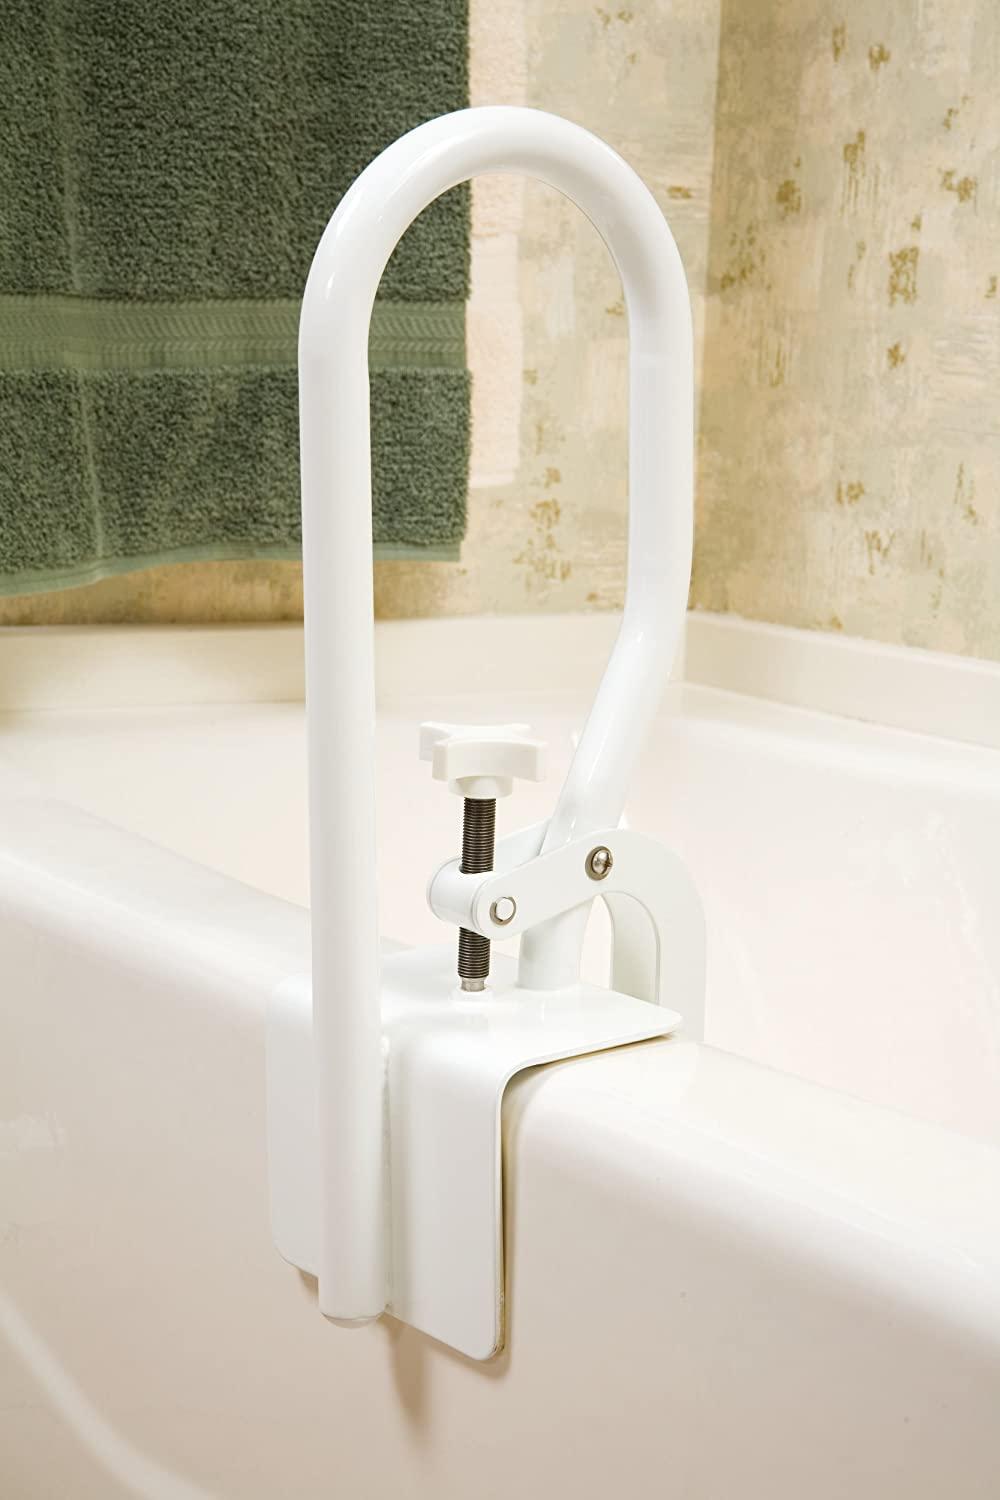 Tub Safety Bars - mobility assistance for the disabled, elderly, etc.